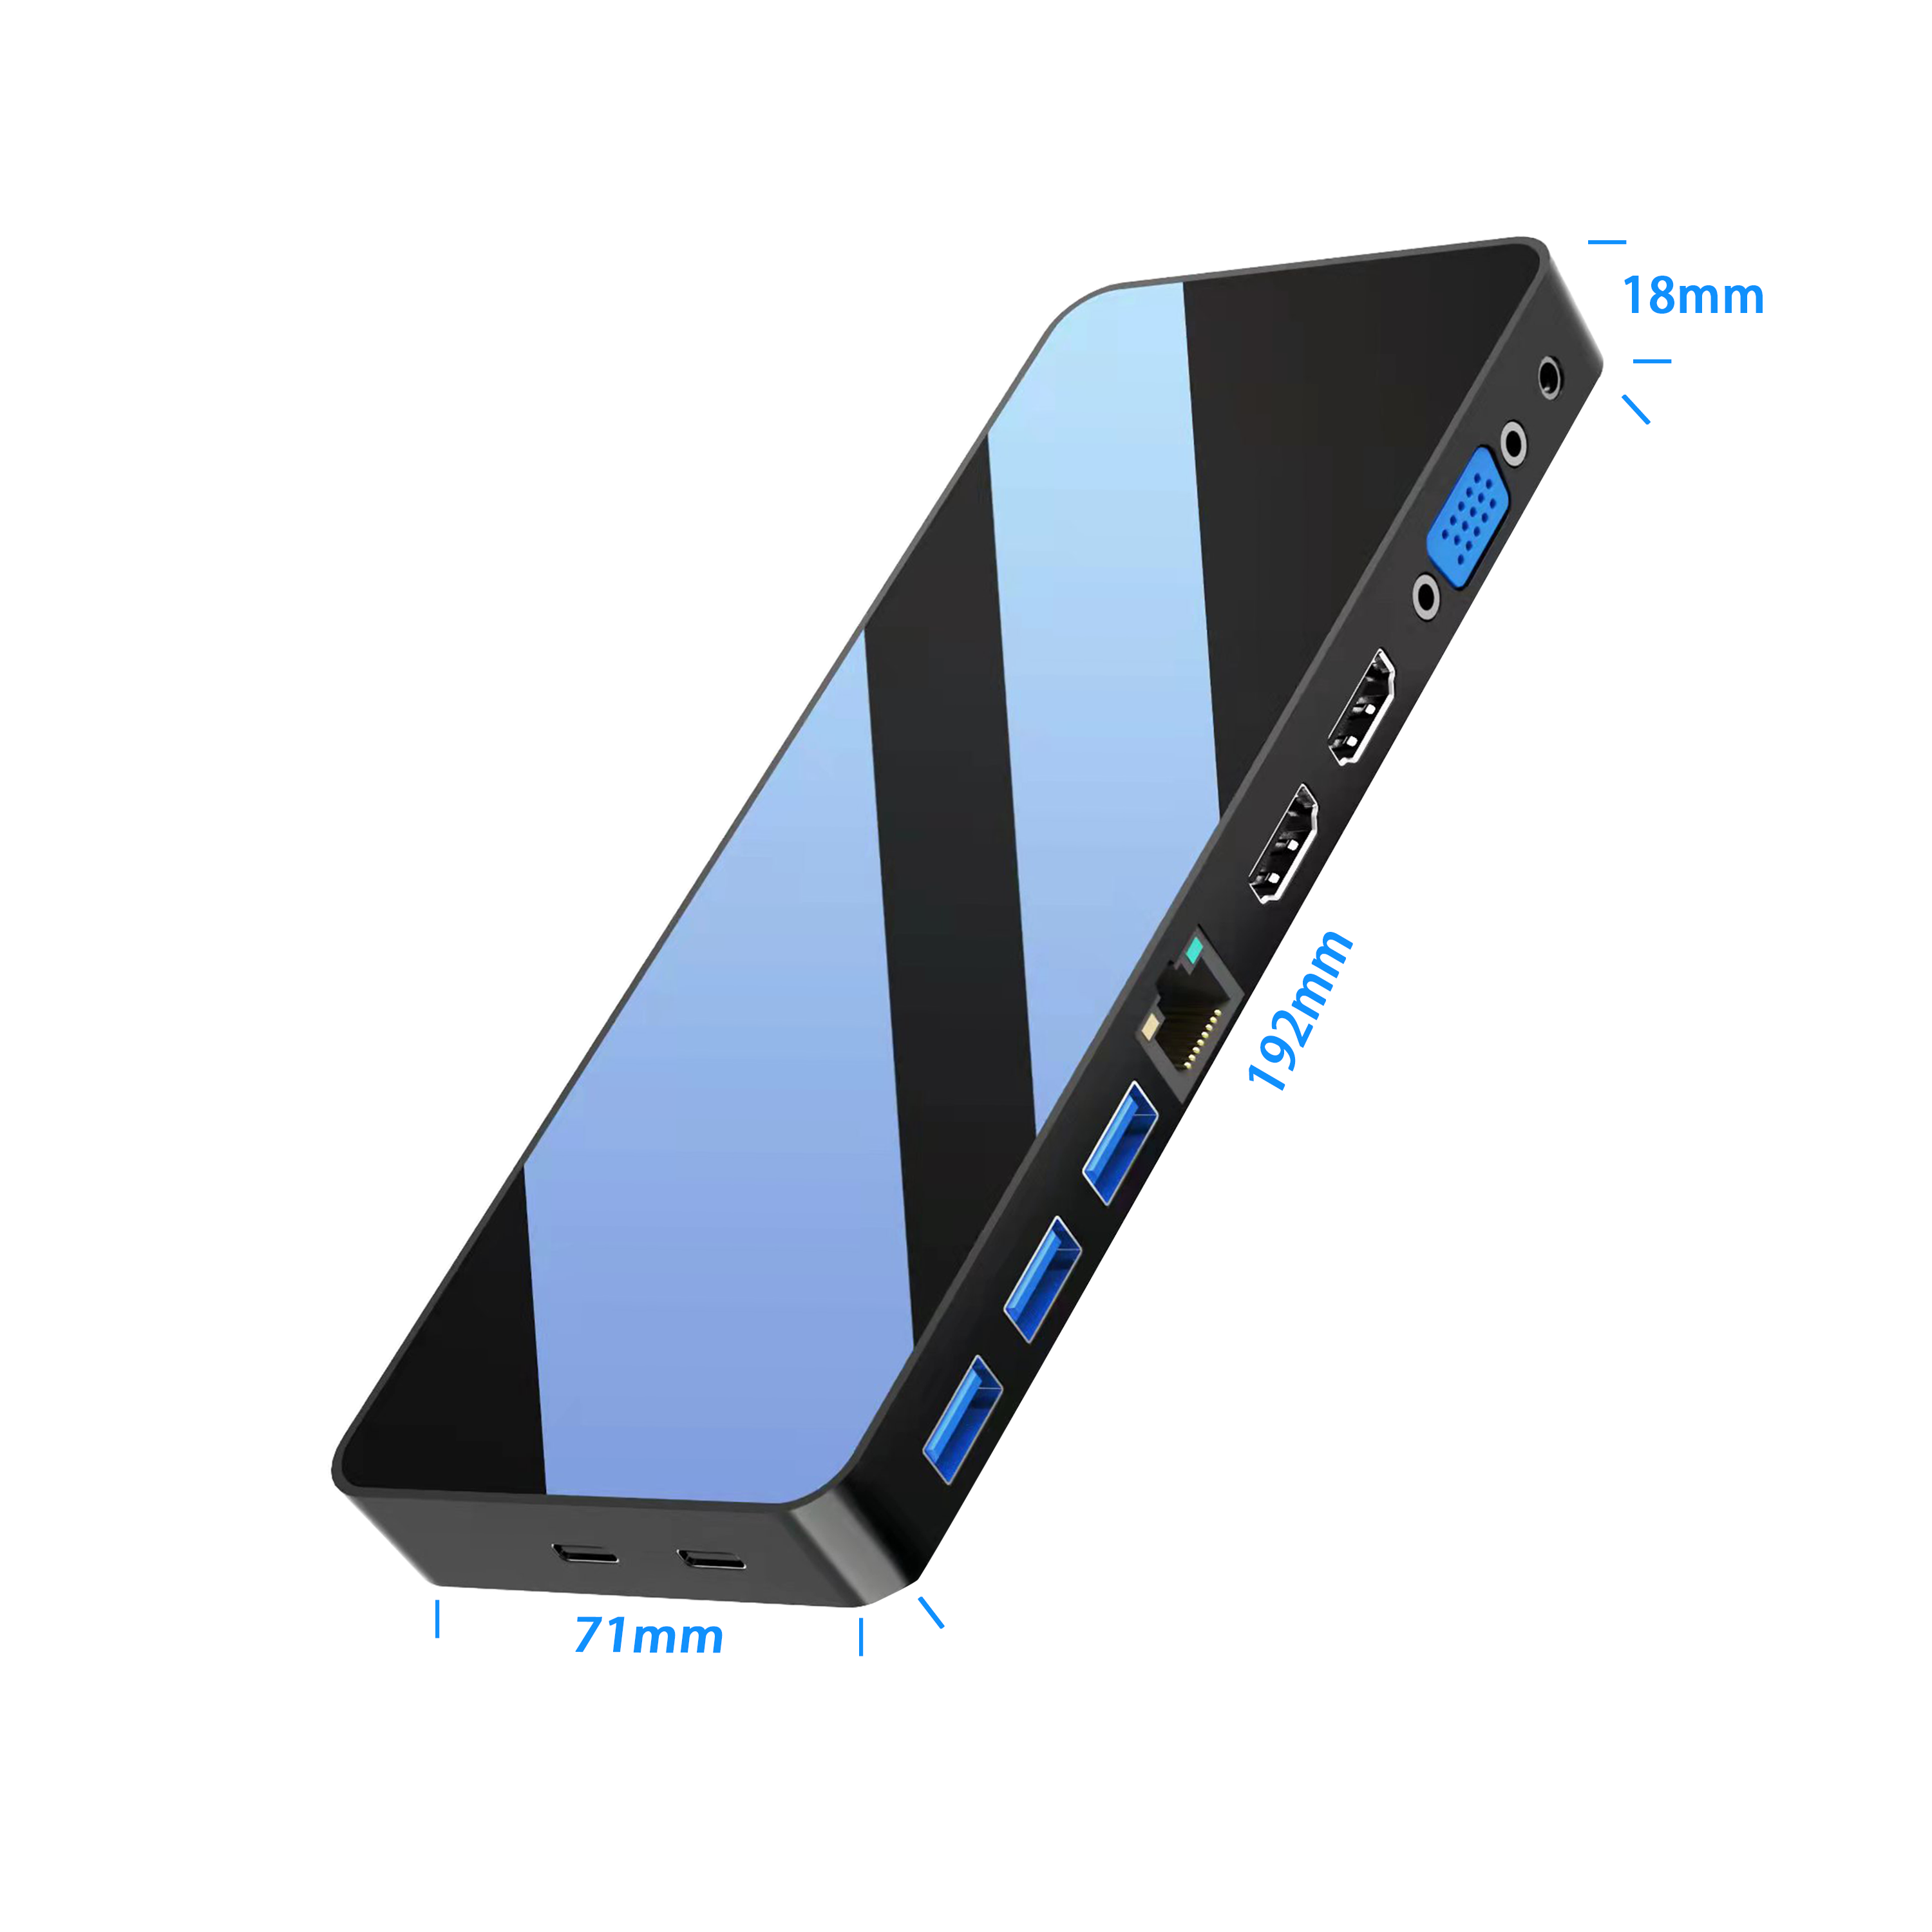 Mirror face 12 port usb c hub with 2 x HDMI 4K + VGA + PD 100W + Type C Data + 3xUSB A 3.0 + RJ45 1000Mbps + 3.5mm Audio + SD+TF card slot all in 1 docking station